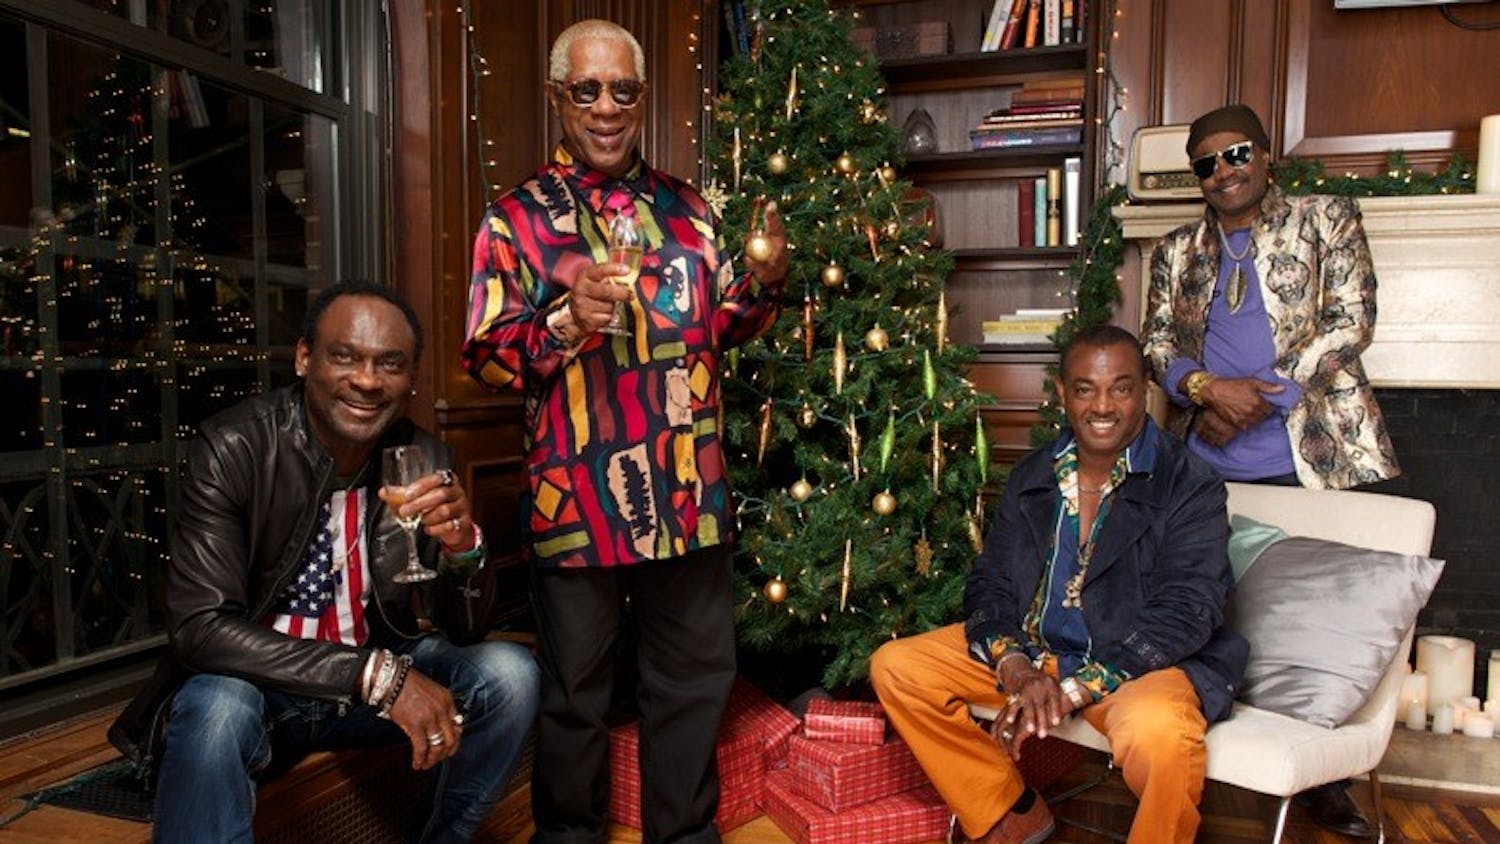 	Kool &amp; the Gang&#8217;s original members, brothers Robert &#8220;Kool&#8221; Bell and Ronald Bell, will play their first New Year&#8217;s show at Columbia&#8217;s Famously Hot New Year&#8217;s